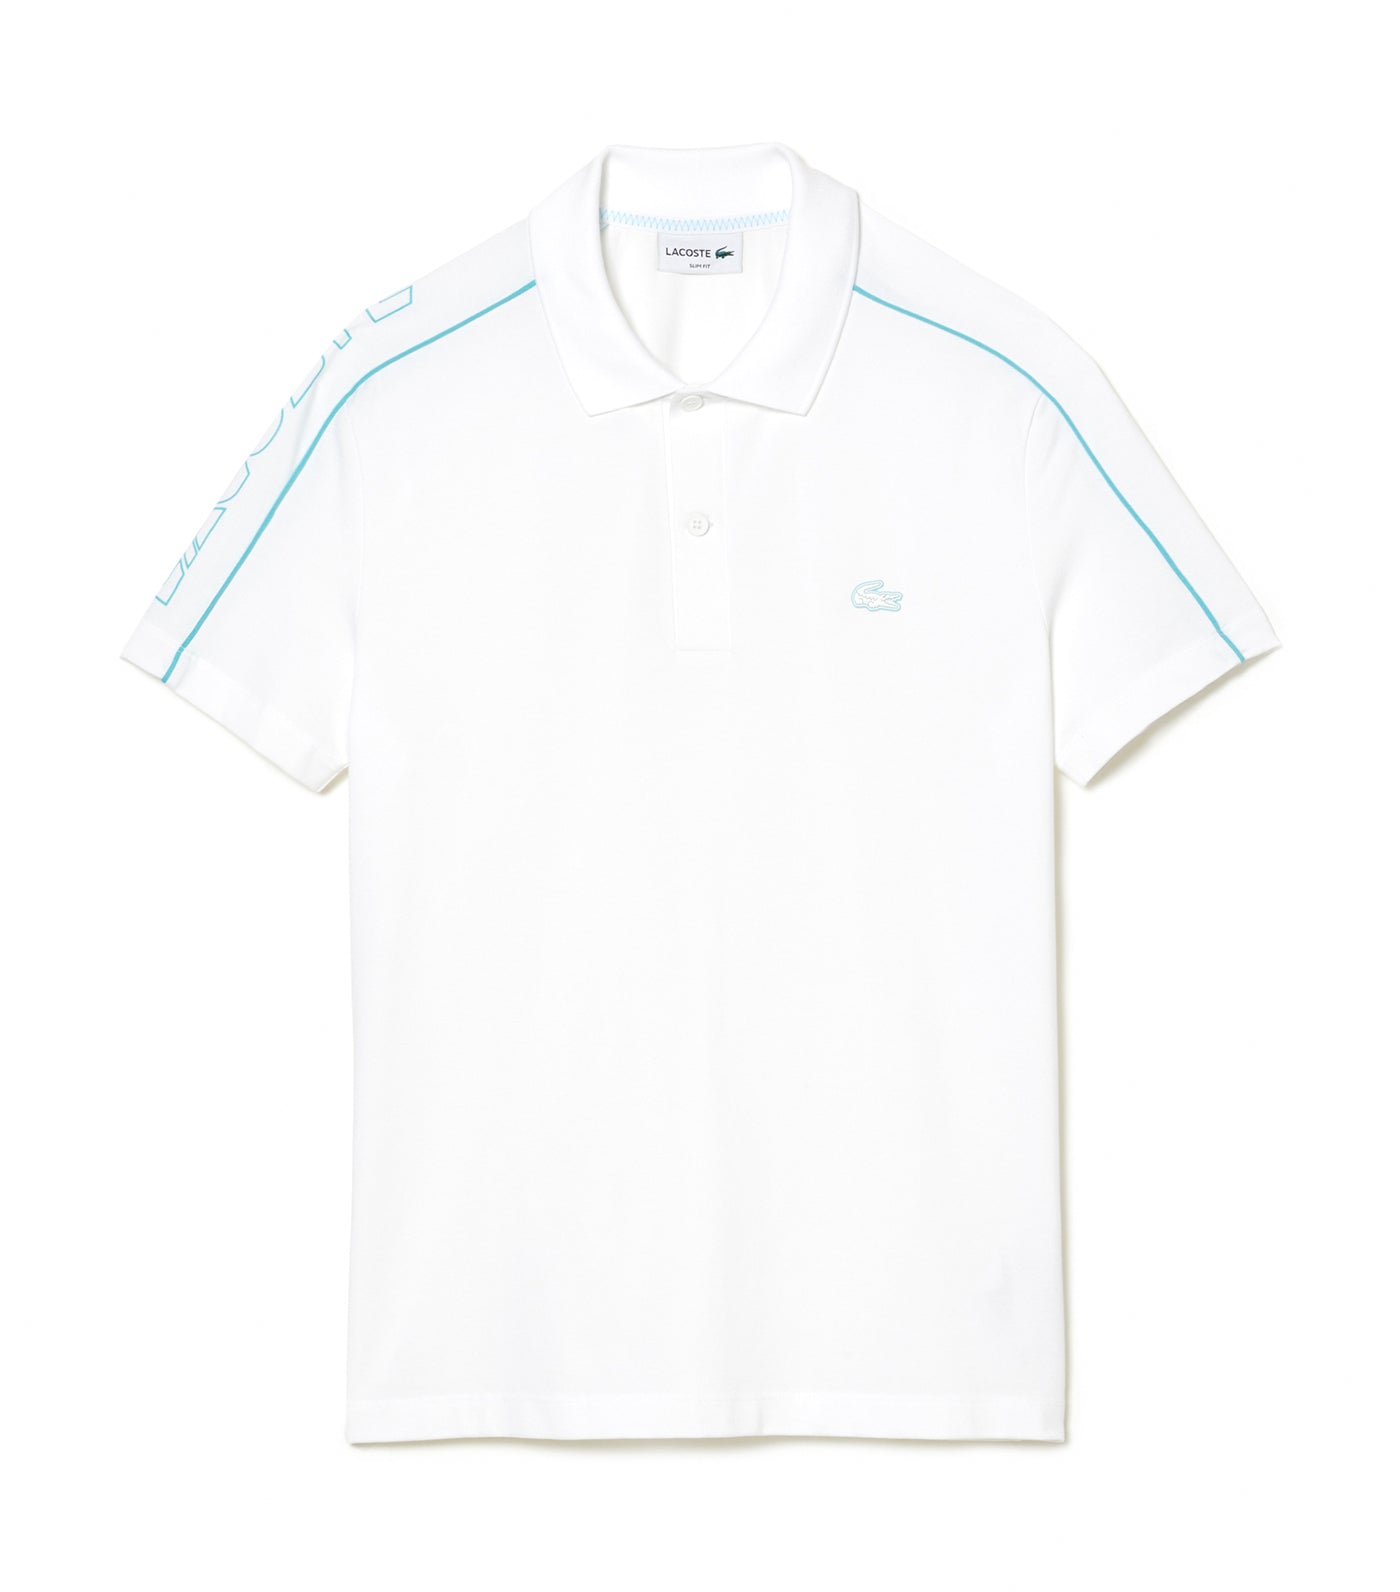 Contrast Accent Lacoste Print Polo Shirt White/Cove